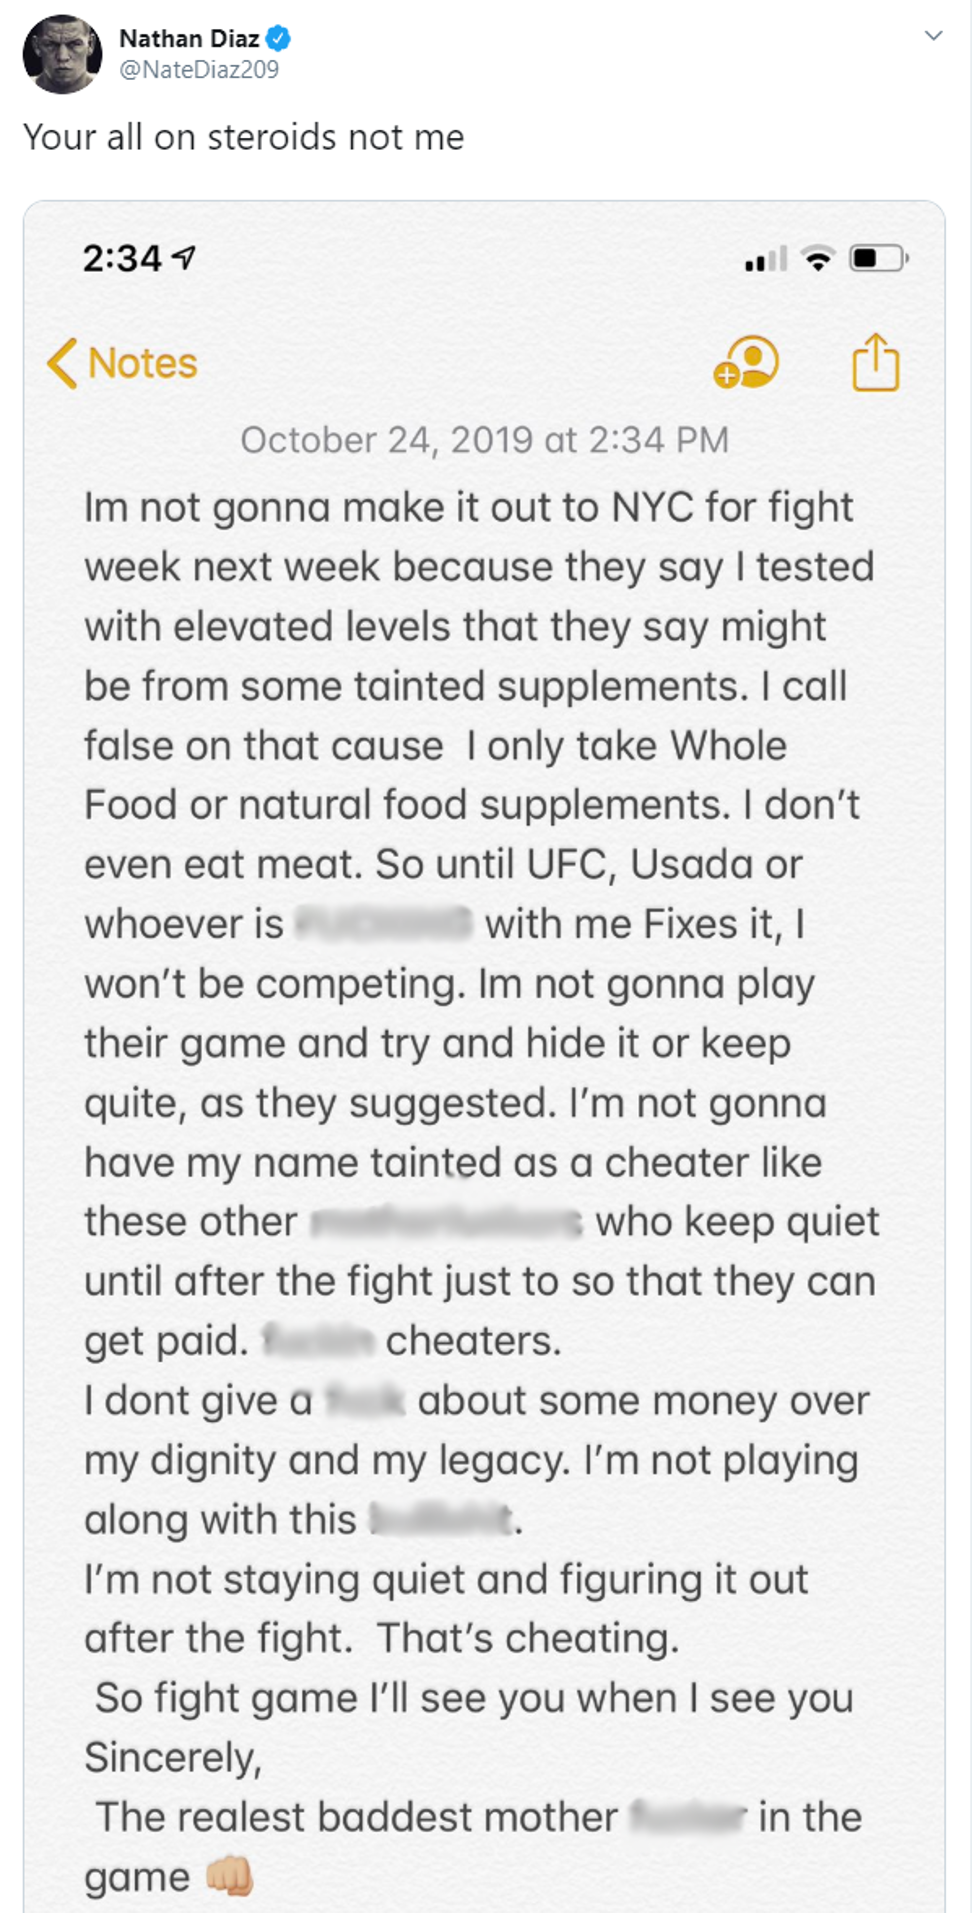 Nate Diaz takes to Twitter to say he is not going to fight at UFC 244 in NYC.